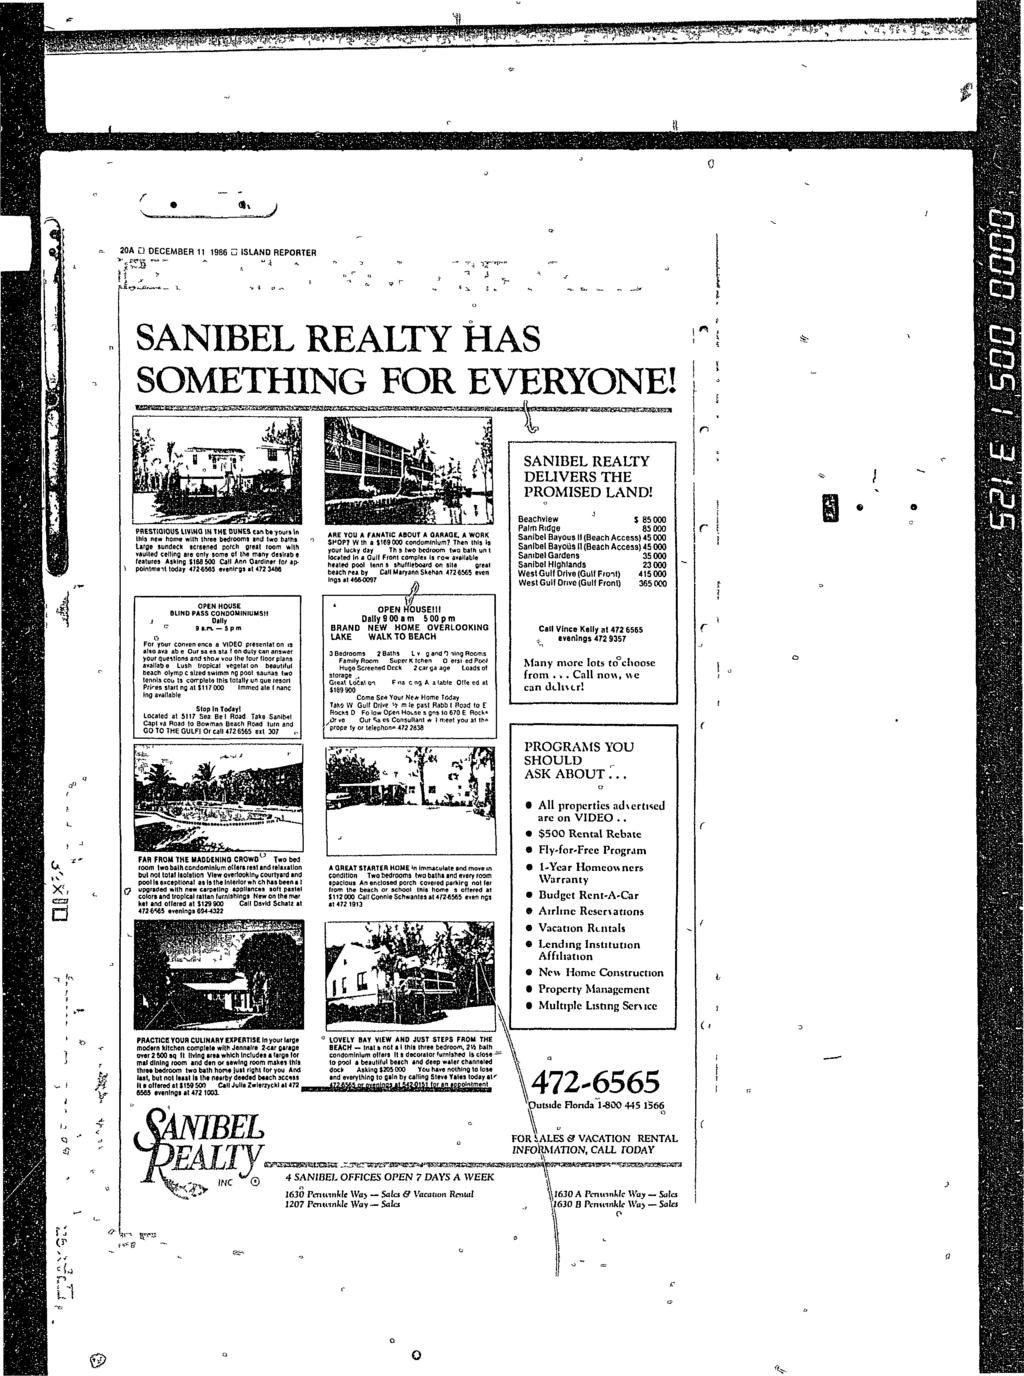 20A D DECEMBER 11 1986 ISLAND REPORTER SANIBEL REALTY HAS SOMETHING FOR EVERYONE! f SANIBEL REALTY DELIVERS THE PROMISED LAND!